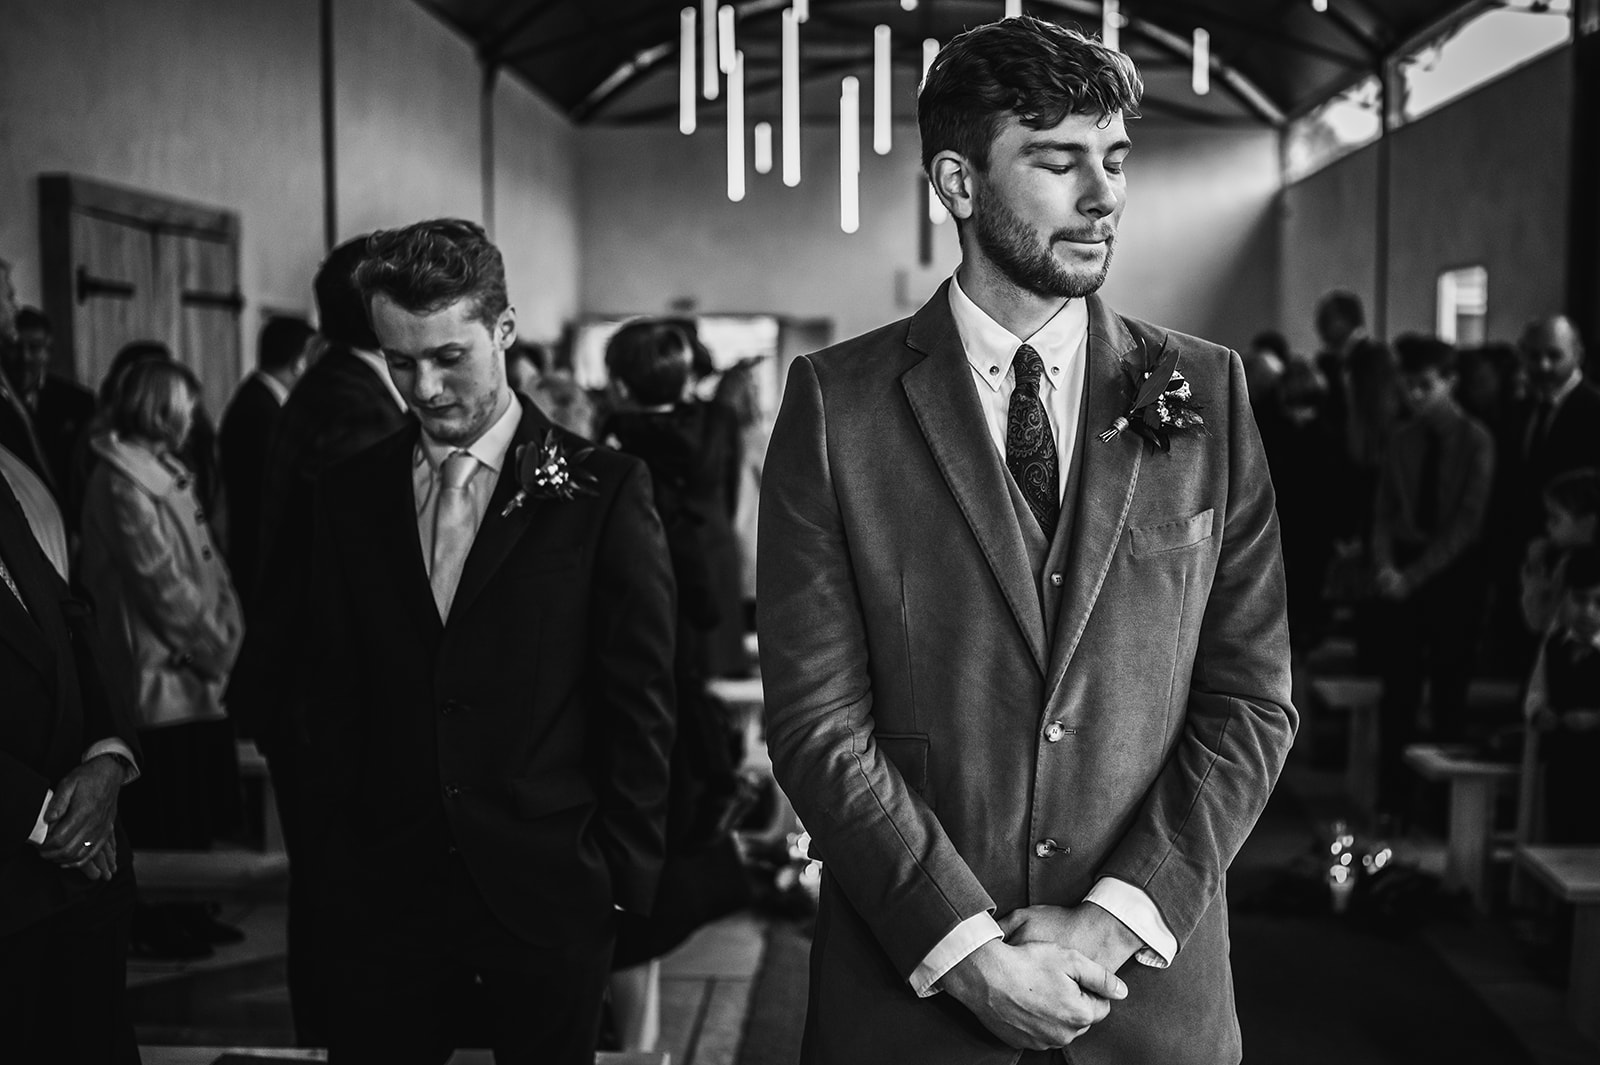 A nervous groom awaits his bride at the Manor Barn in Harlton